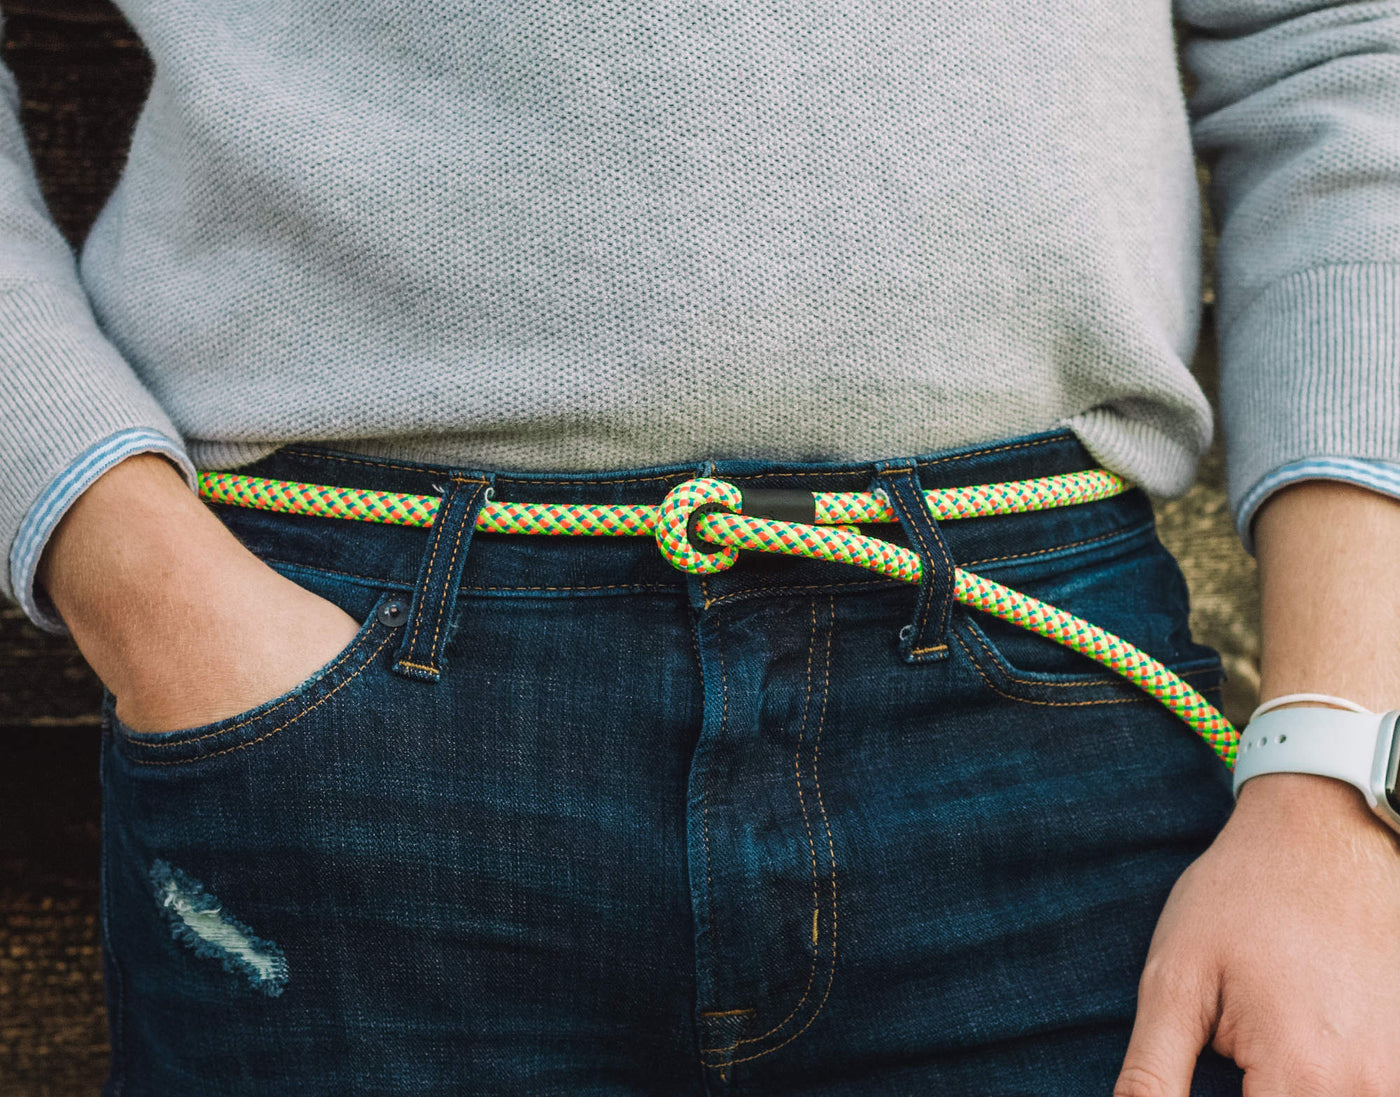 How to Make Your Own Rope Belt